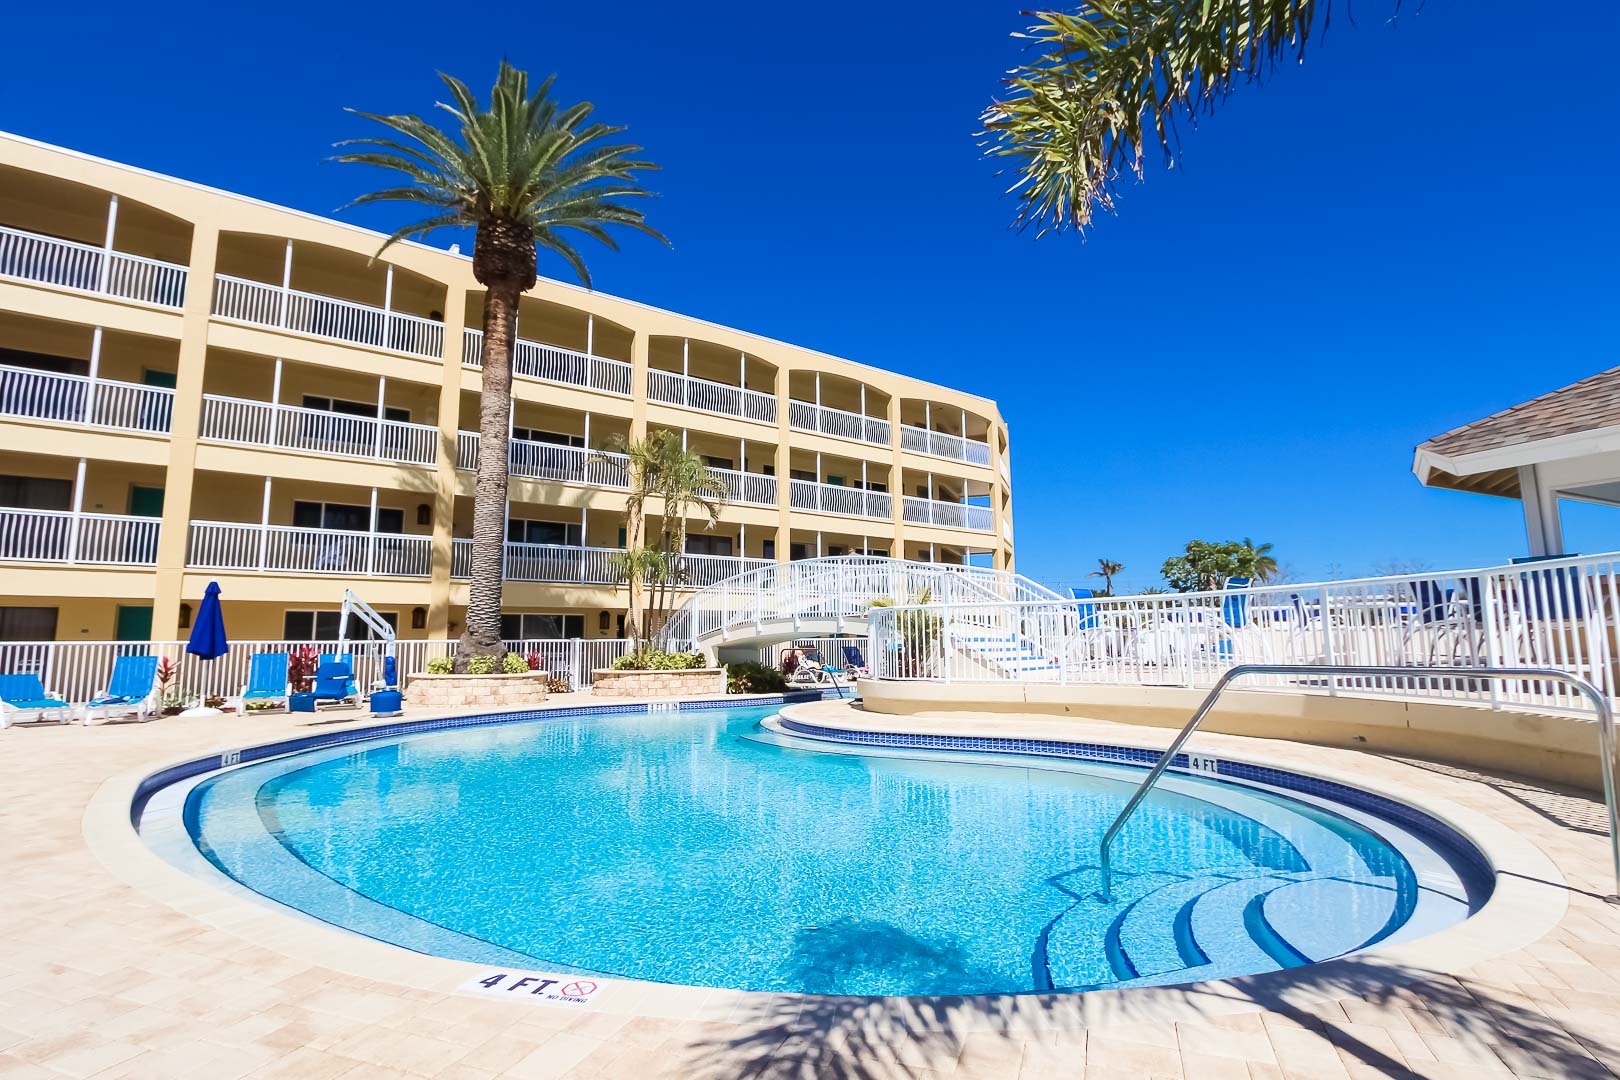 A peaceful outdoor swimming pool at VRI's Coral Reef Beach Resort in St. Pete Beach, Florida.